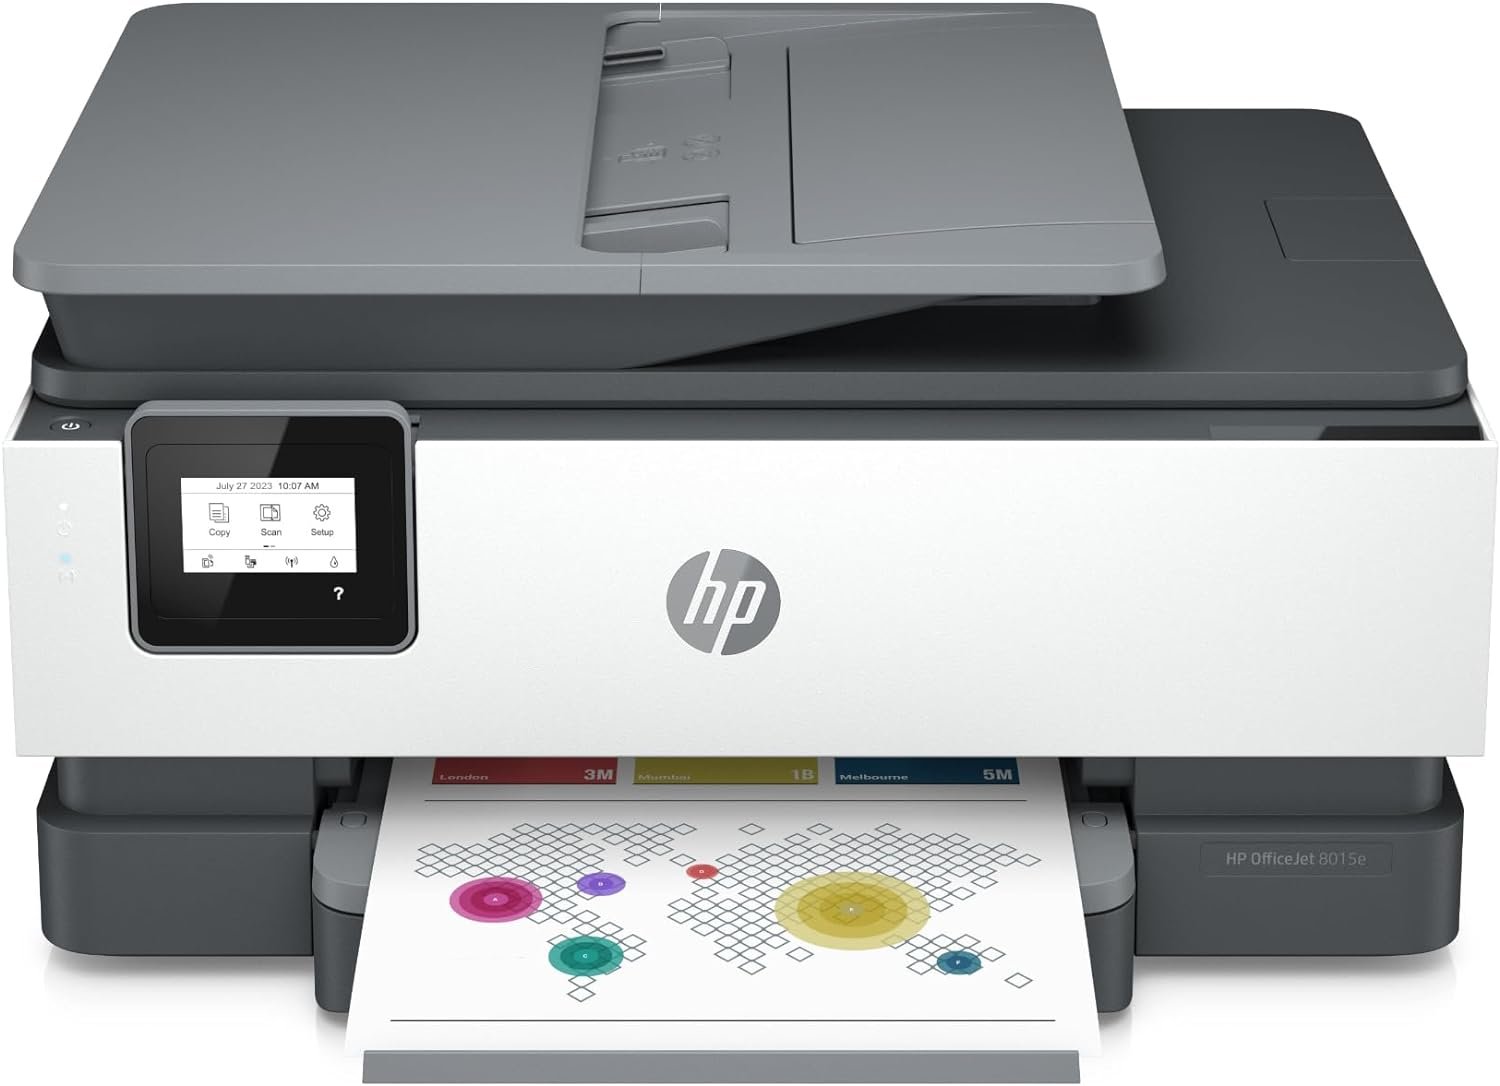 HP OfficeJet 8015e Wireless Color All-in-One Printer